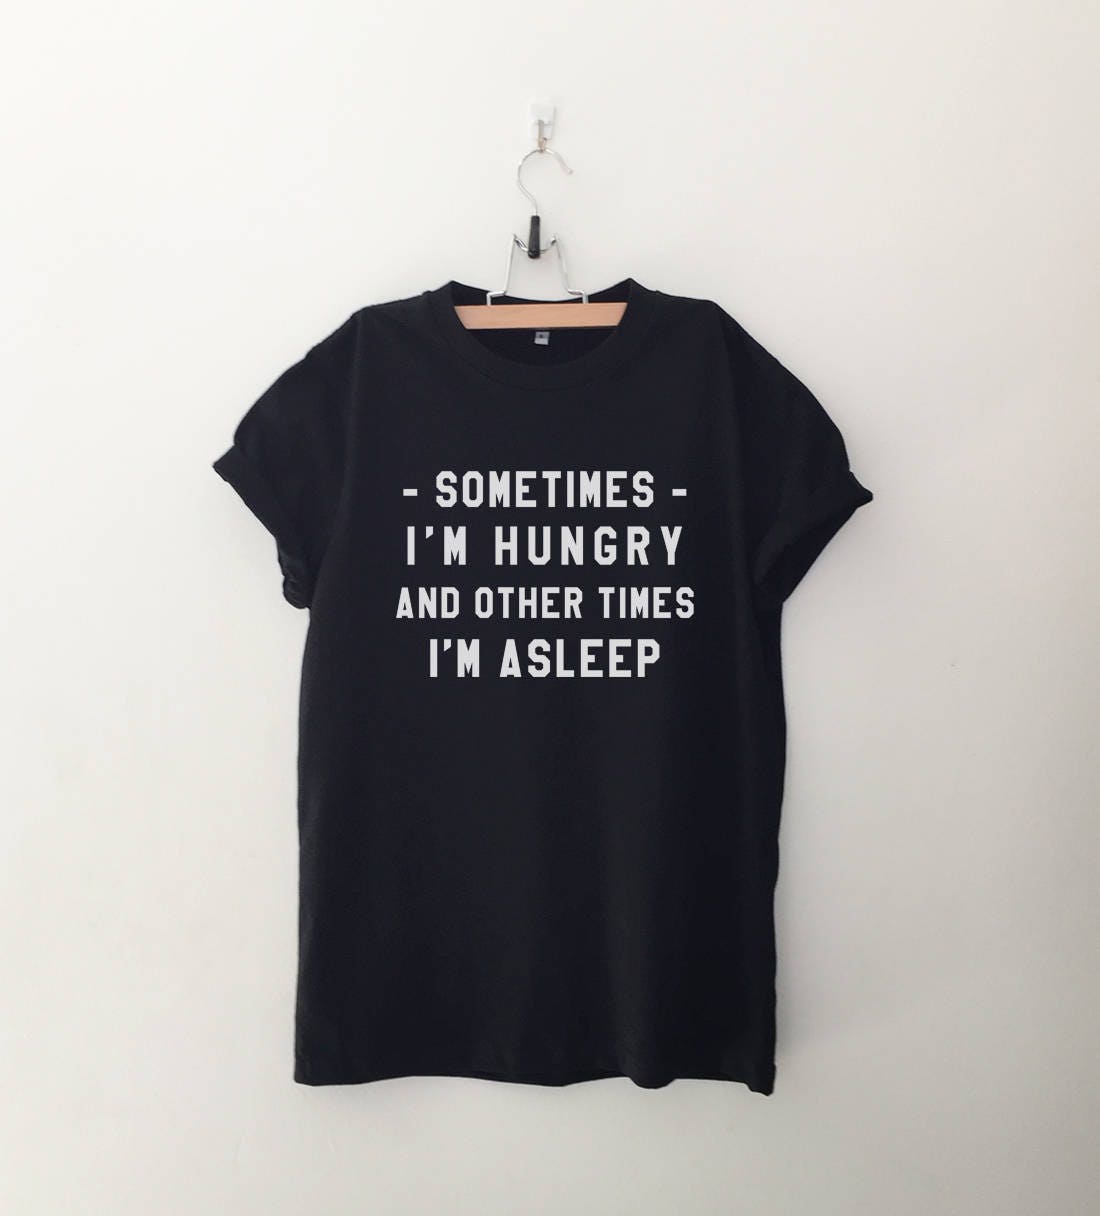 Tumblr Shirts Sometime I'm hungry and other times I'm | Etsy